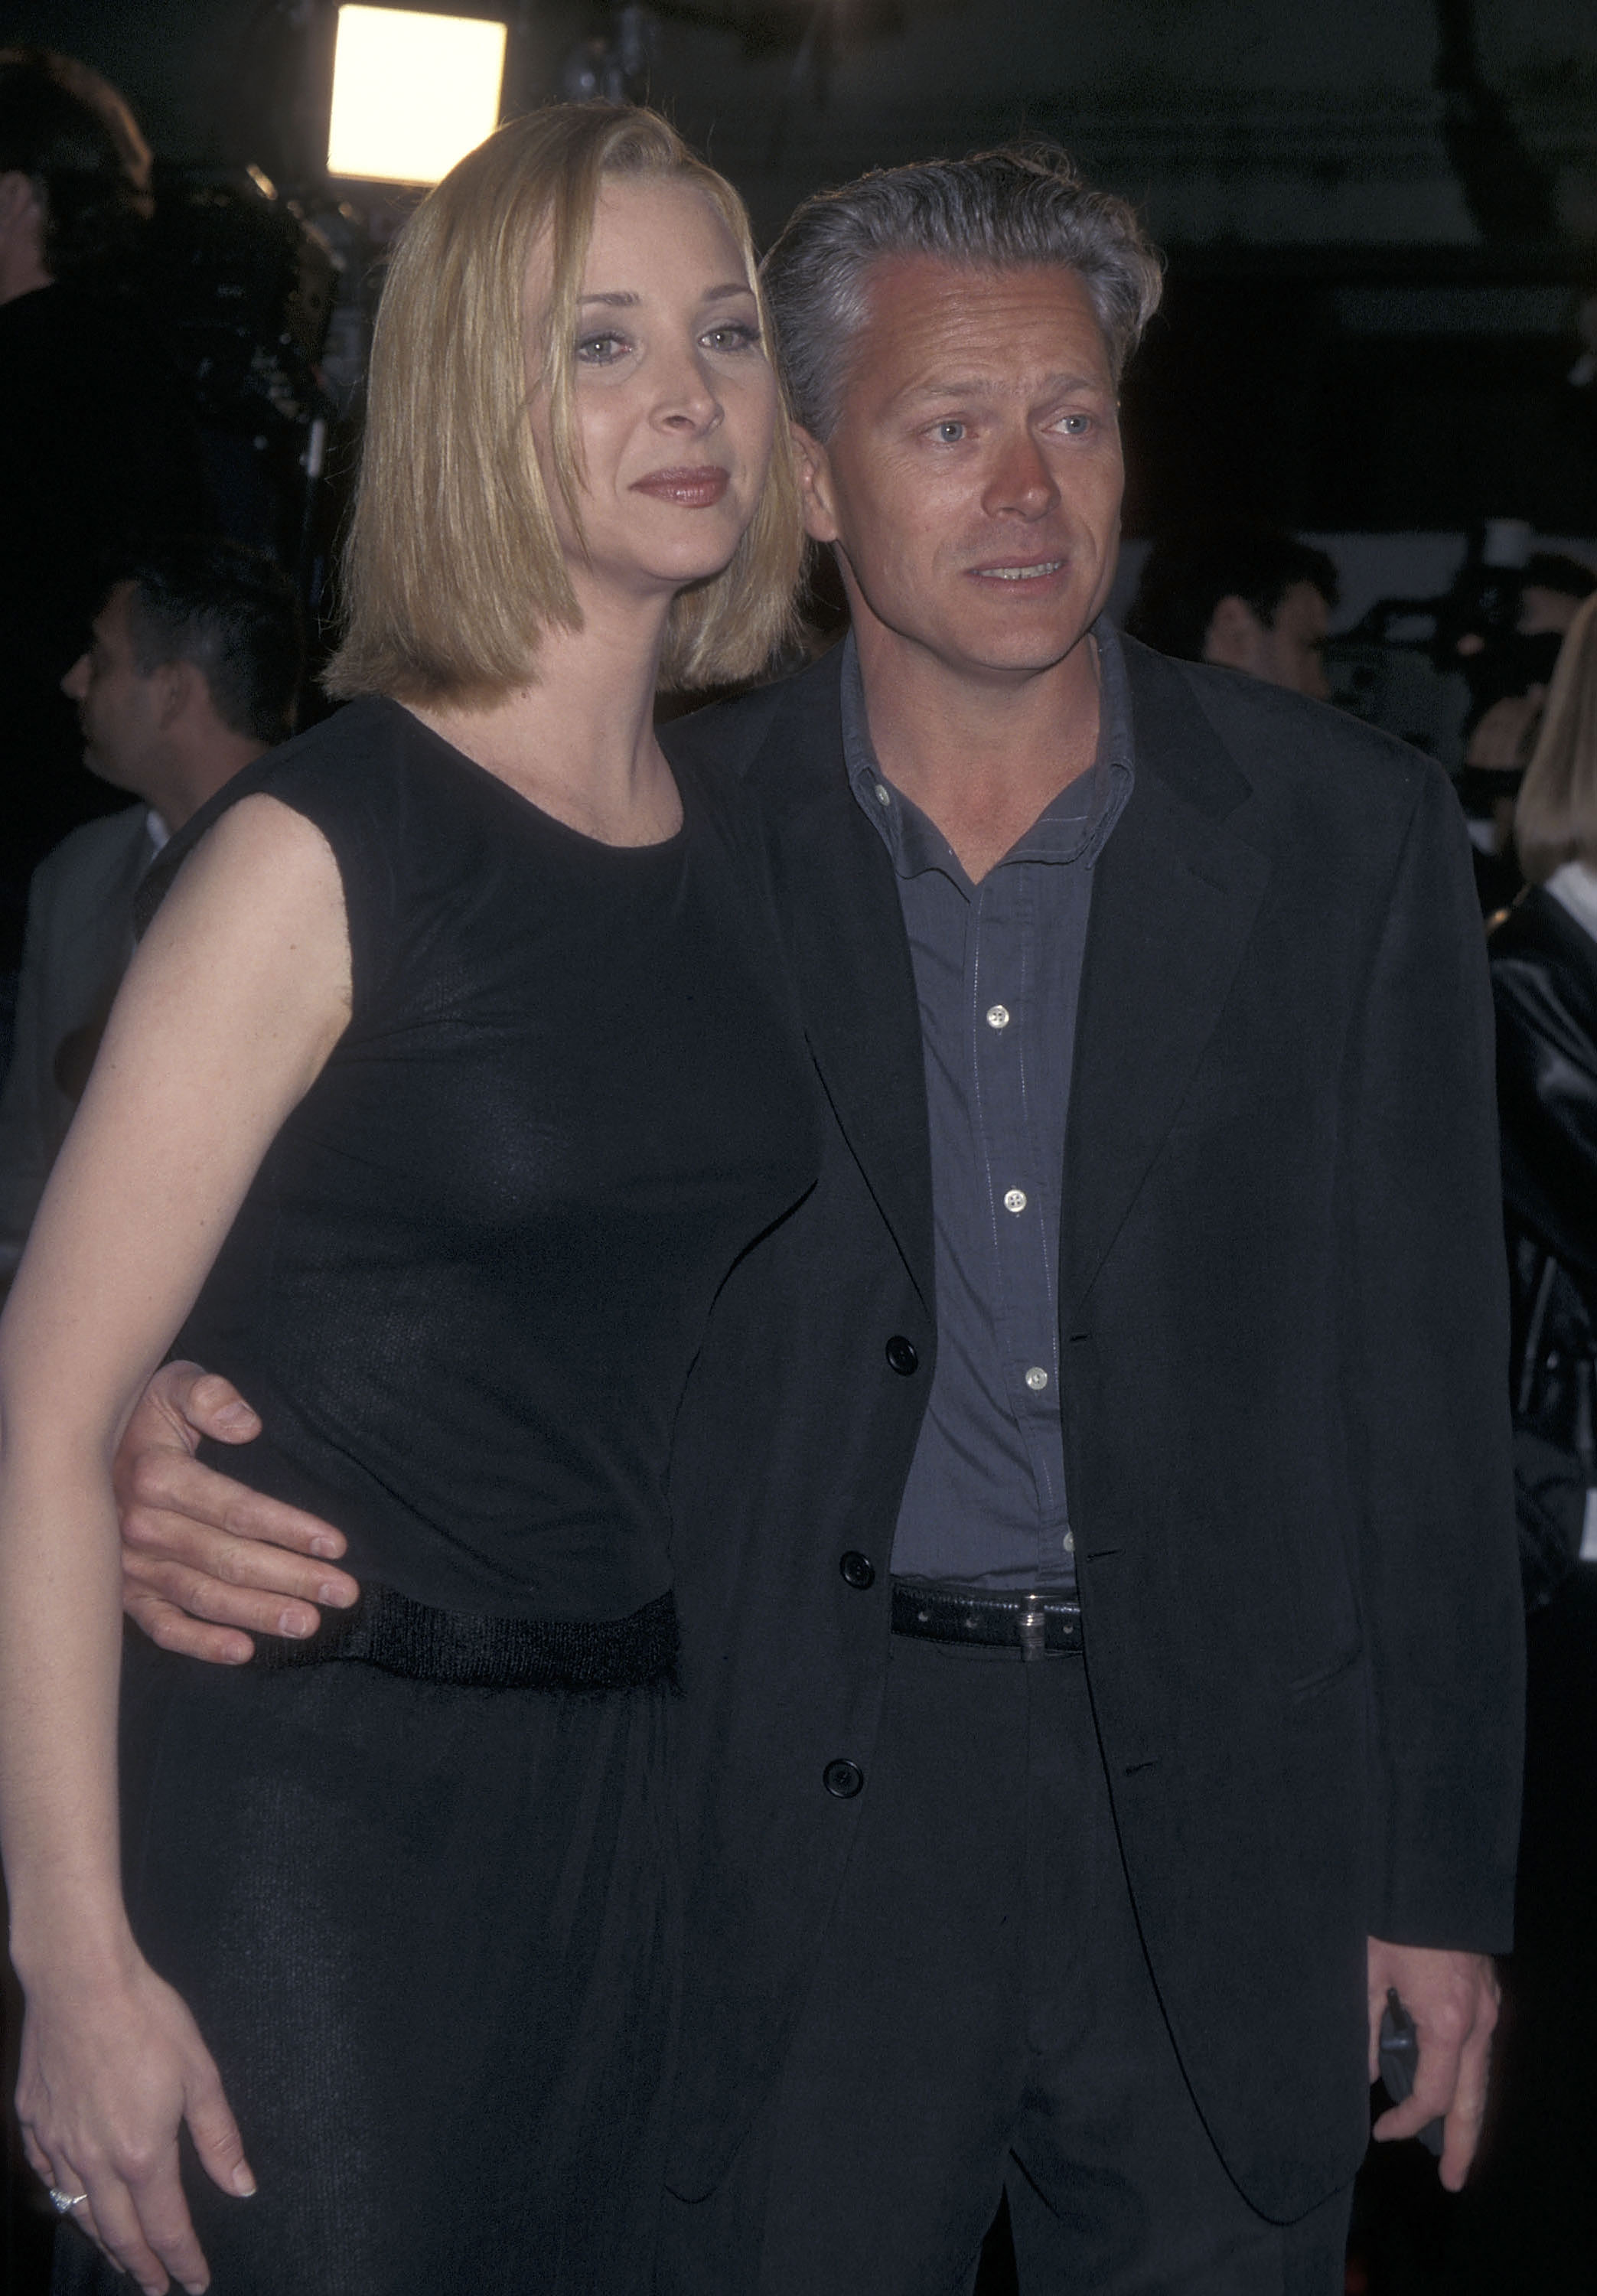 Lisa Kudrow and Michel Stern attend the premiere for "Analyze This" in Westwood, California on March 1, 1999 | Source: Getty Images